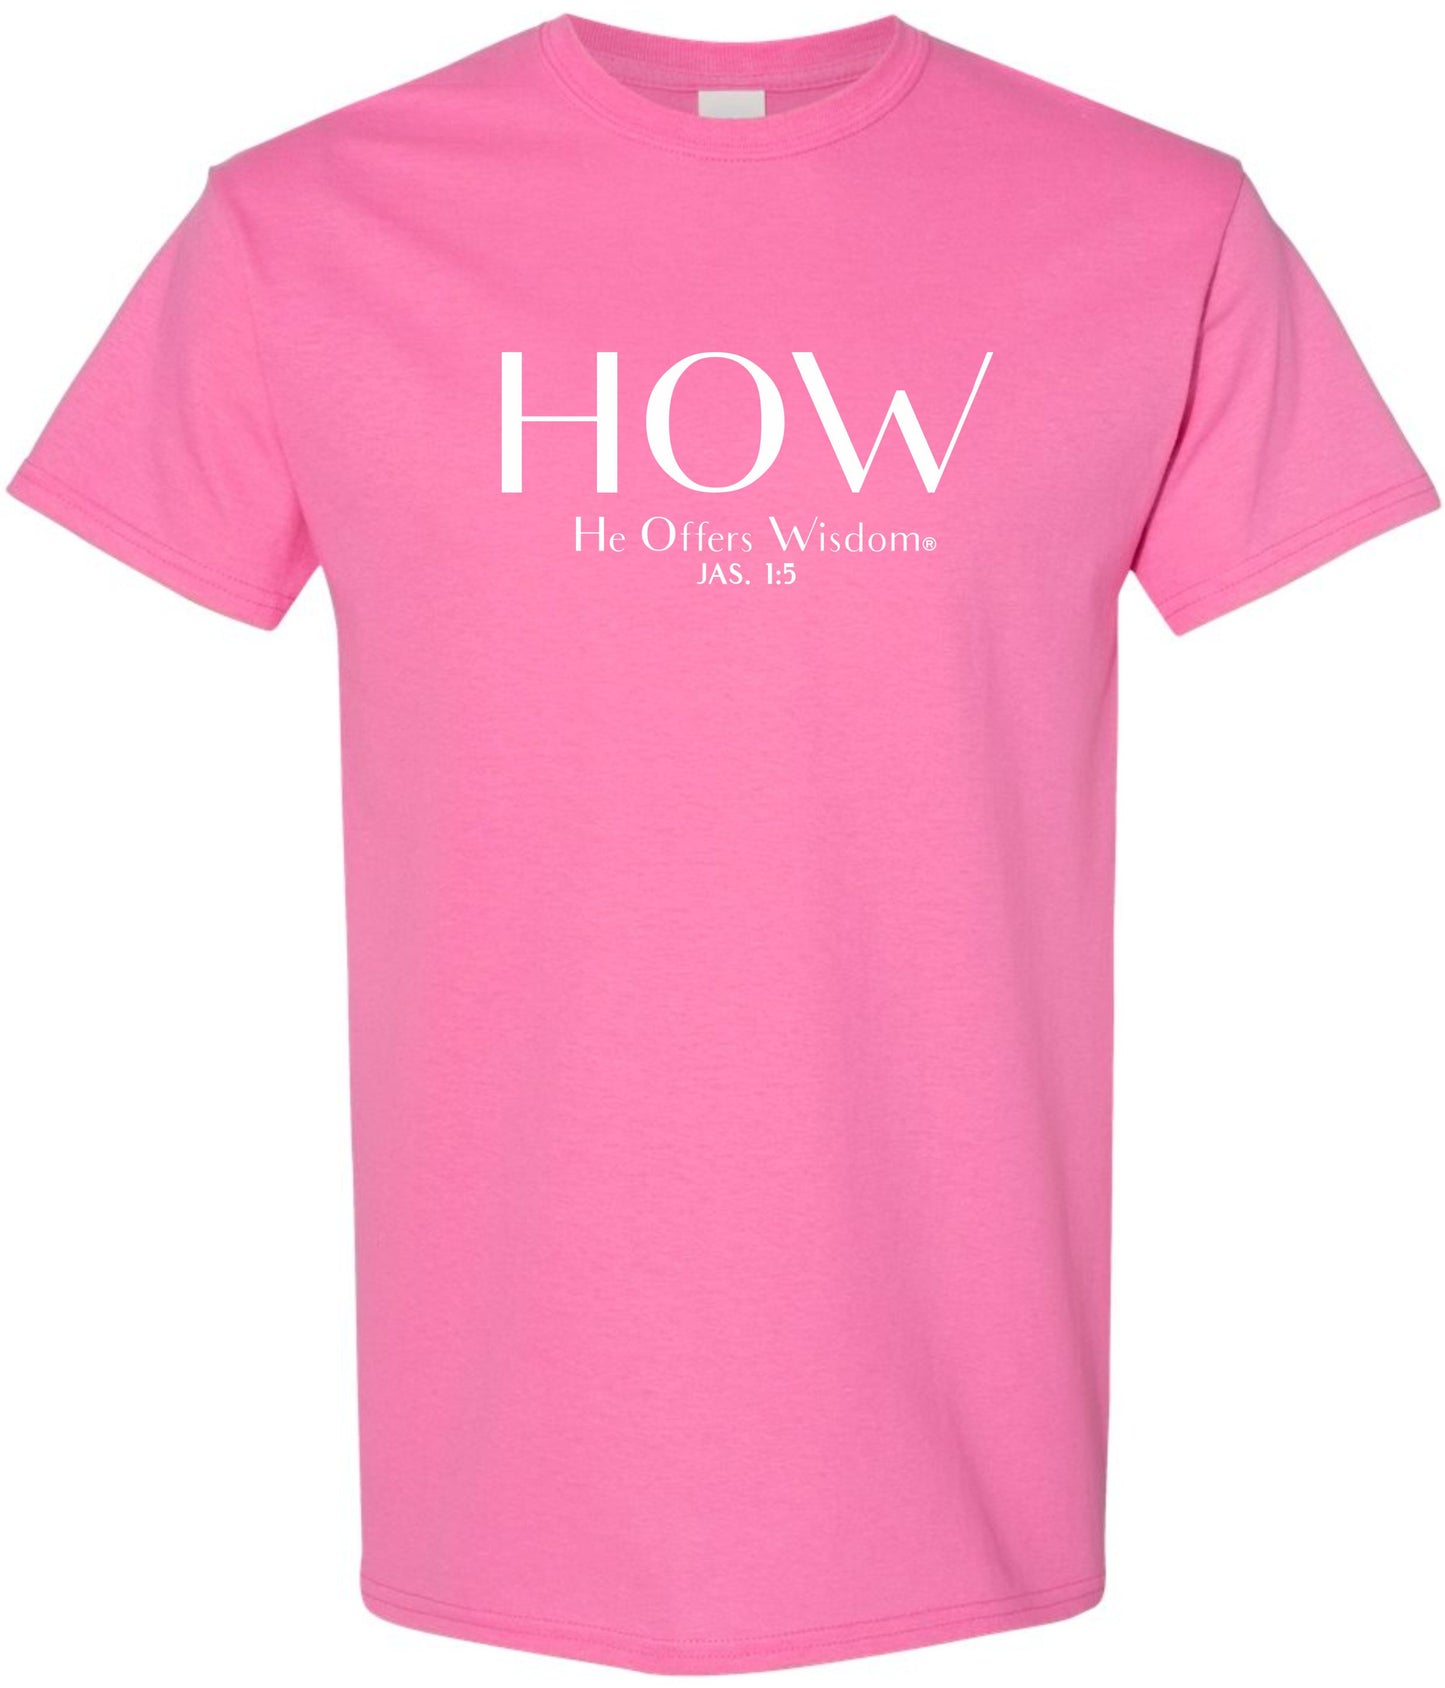 H.O.W.®  He offers wisdom® This is H.O.W.® we do it® Women and youth girls t-shirt